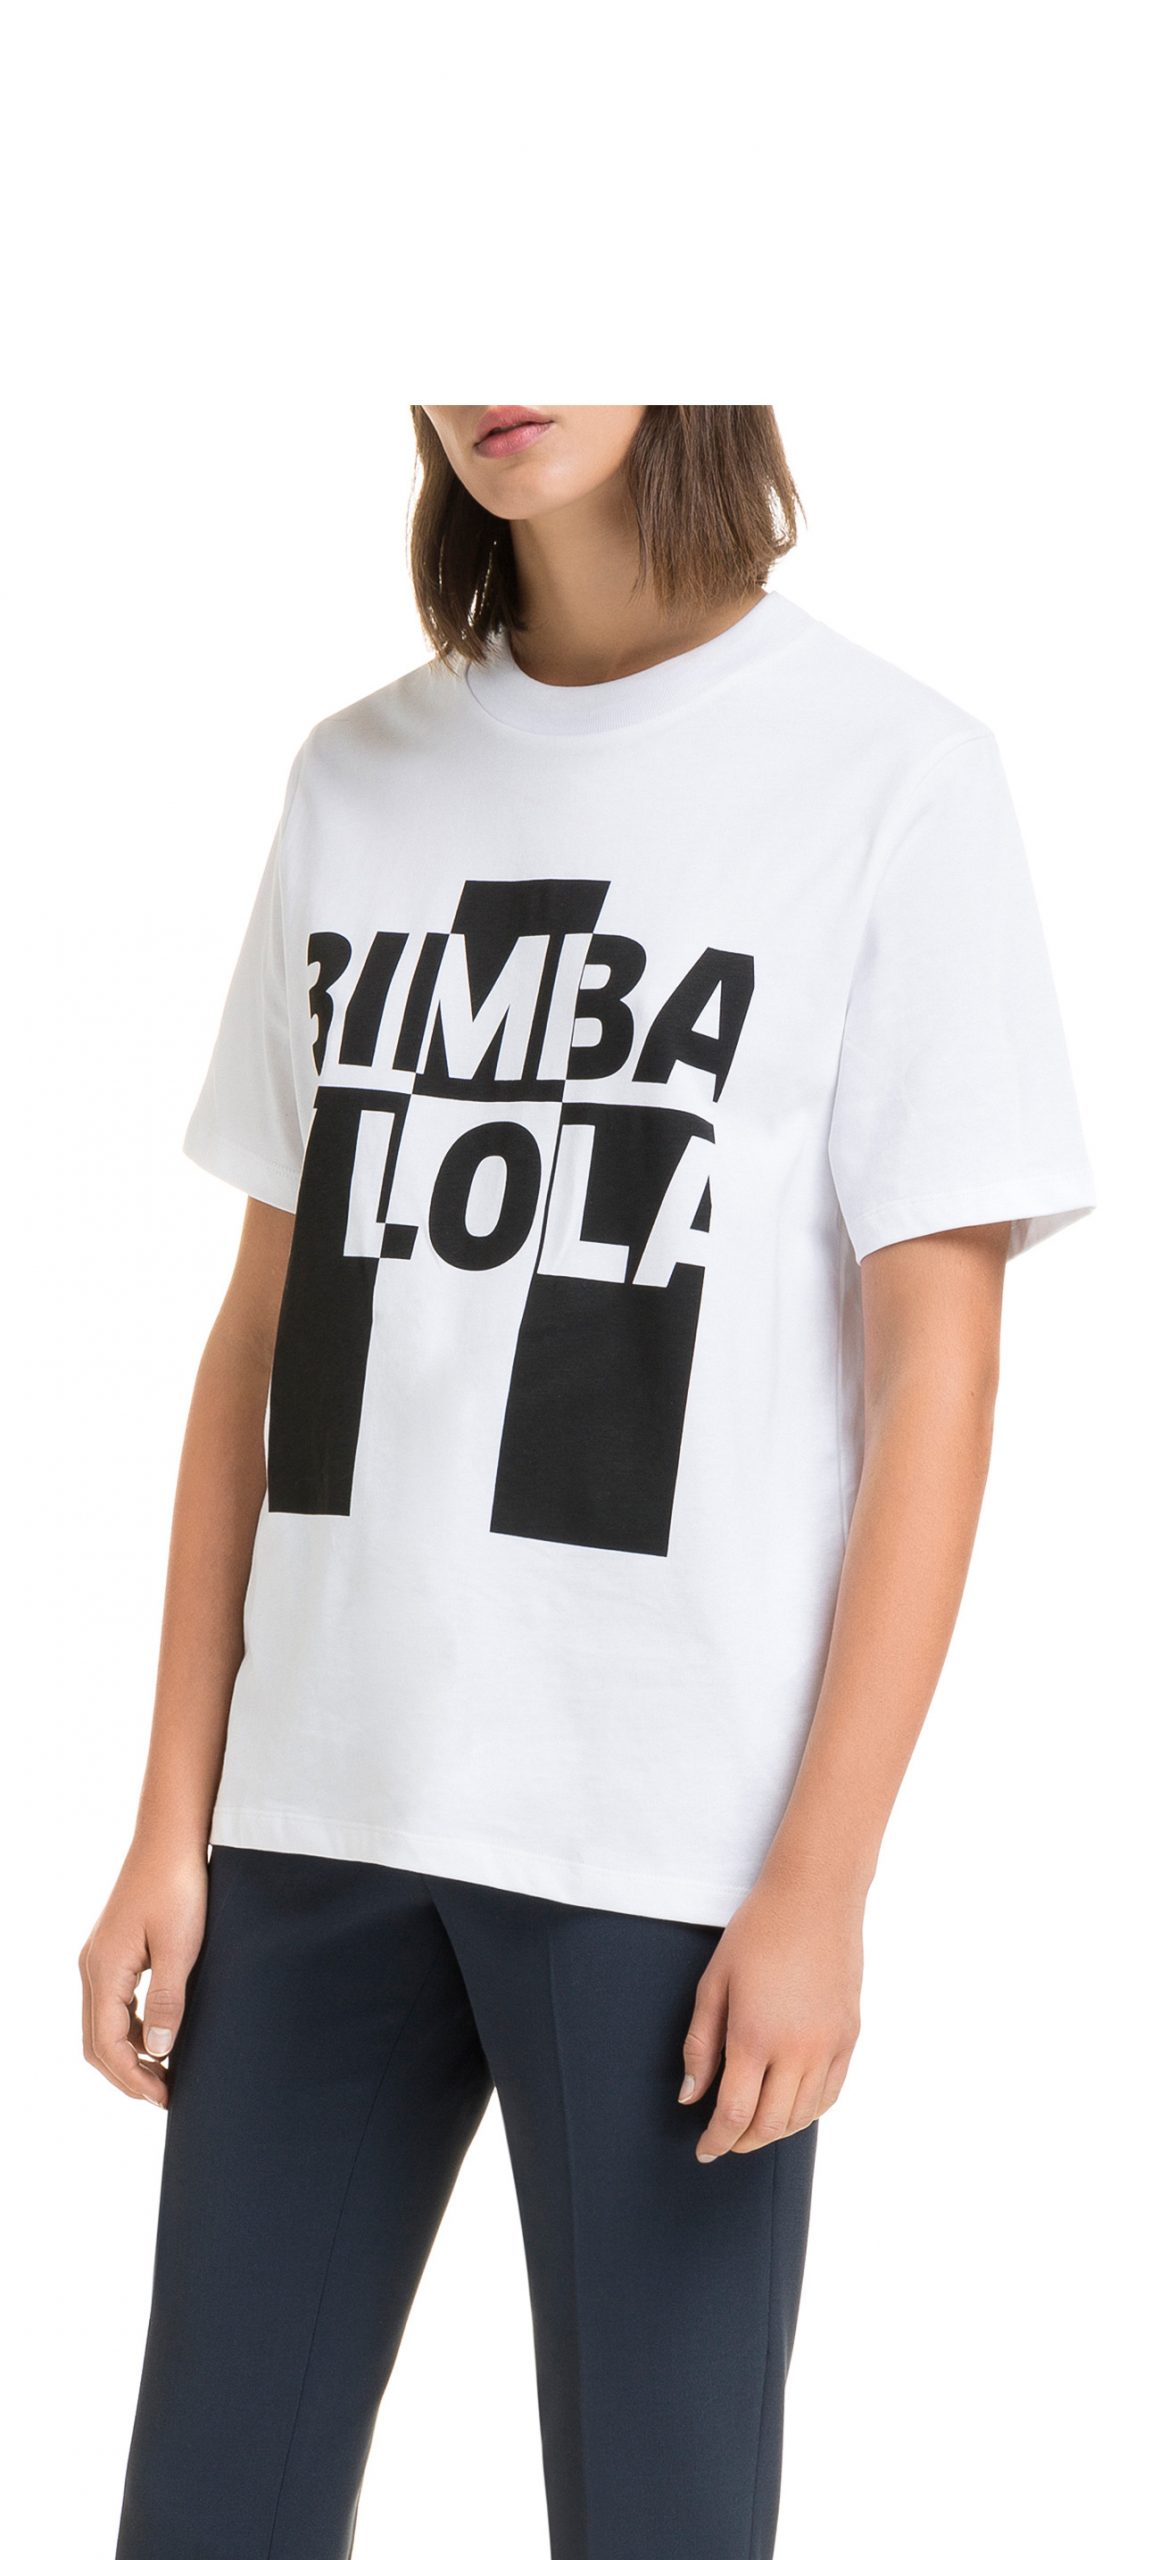 Bimba y Lola Outlet Days